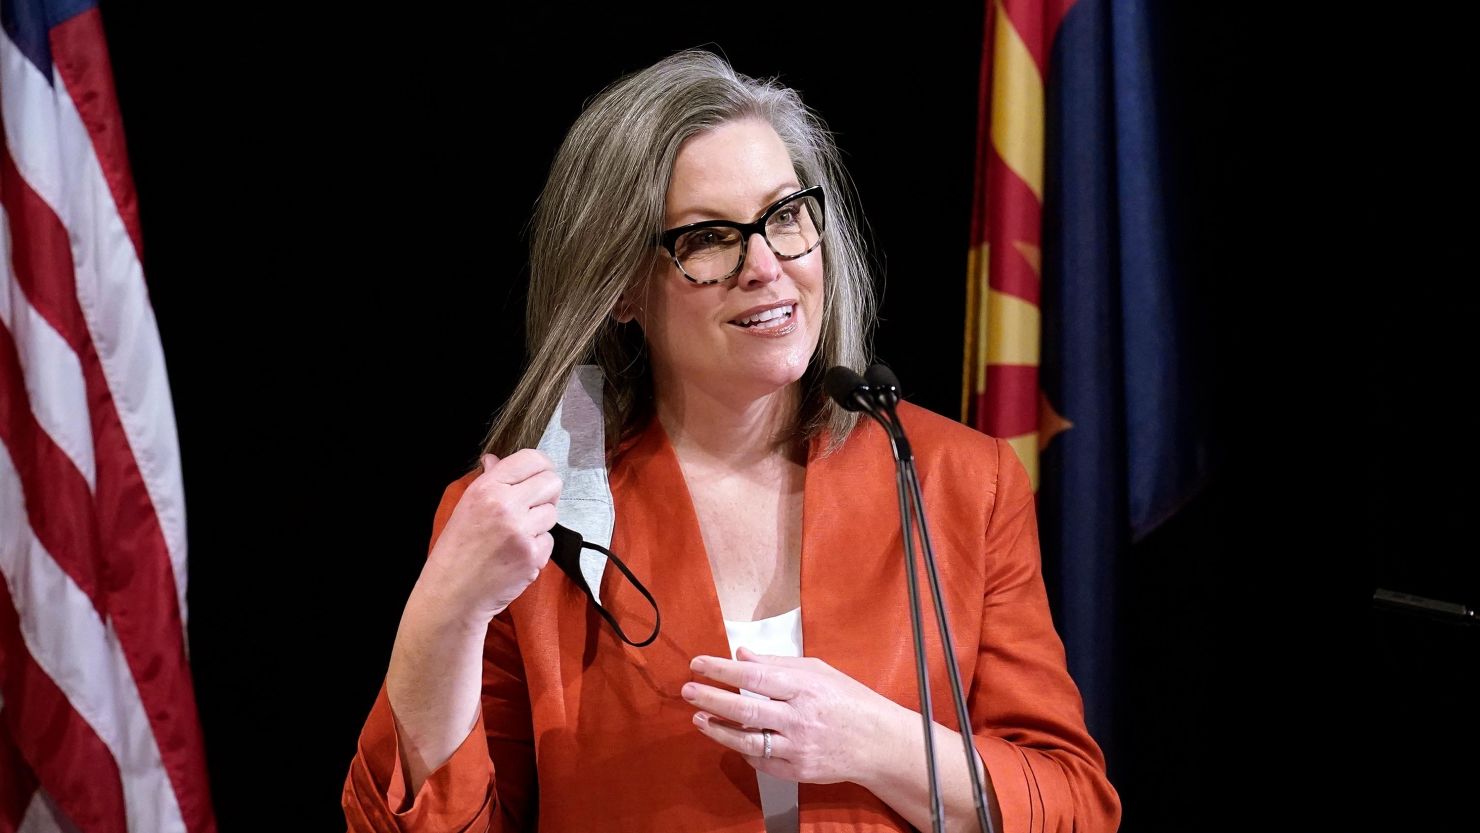 In this December 2020 photo, Arizona Secretary of State Katie Hobbs removes her face mask as she addresses the members of Arizona's Electoral College prior to them casting their votes, in Phoenix. 